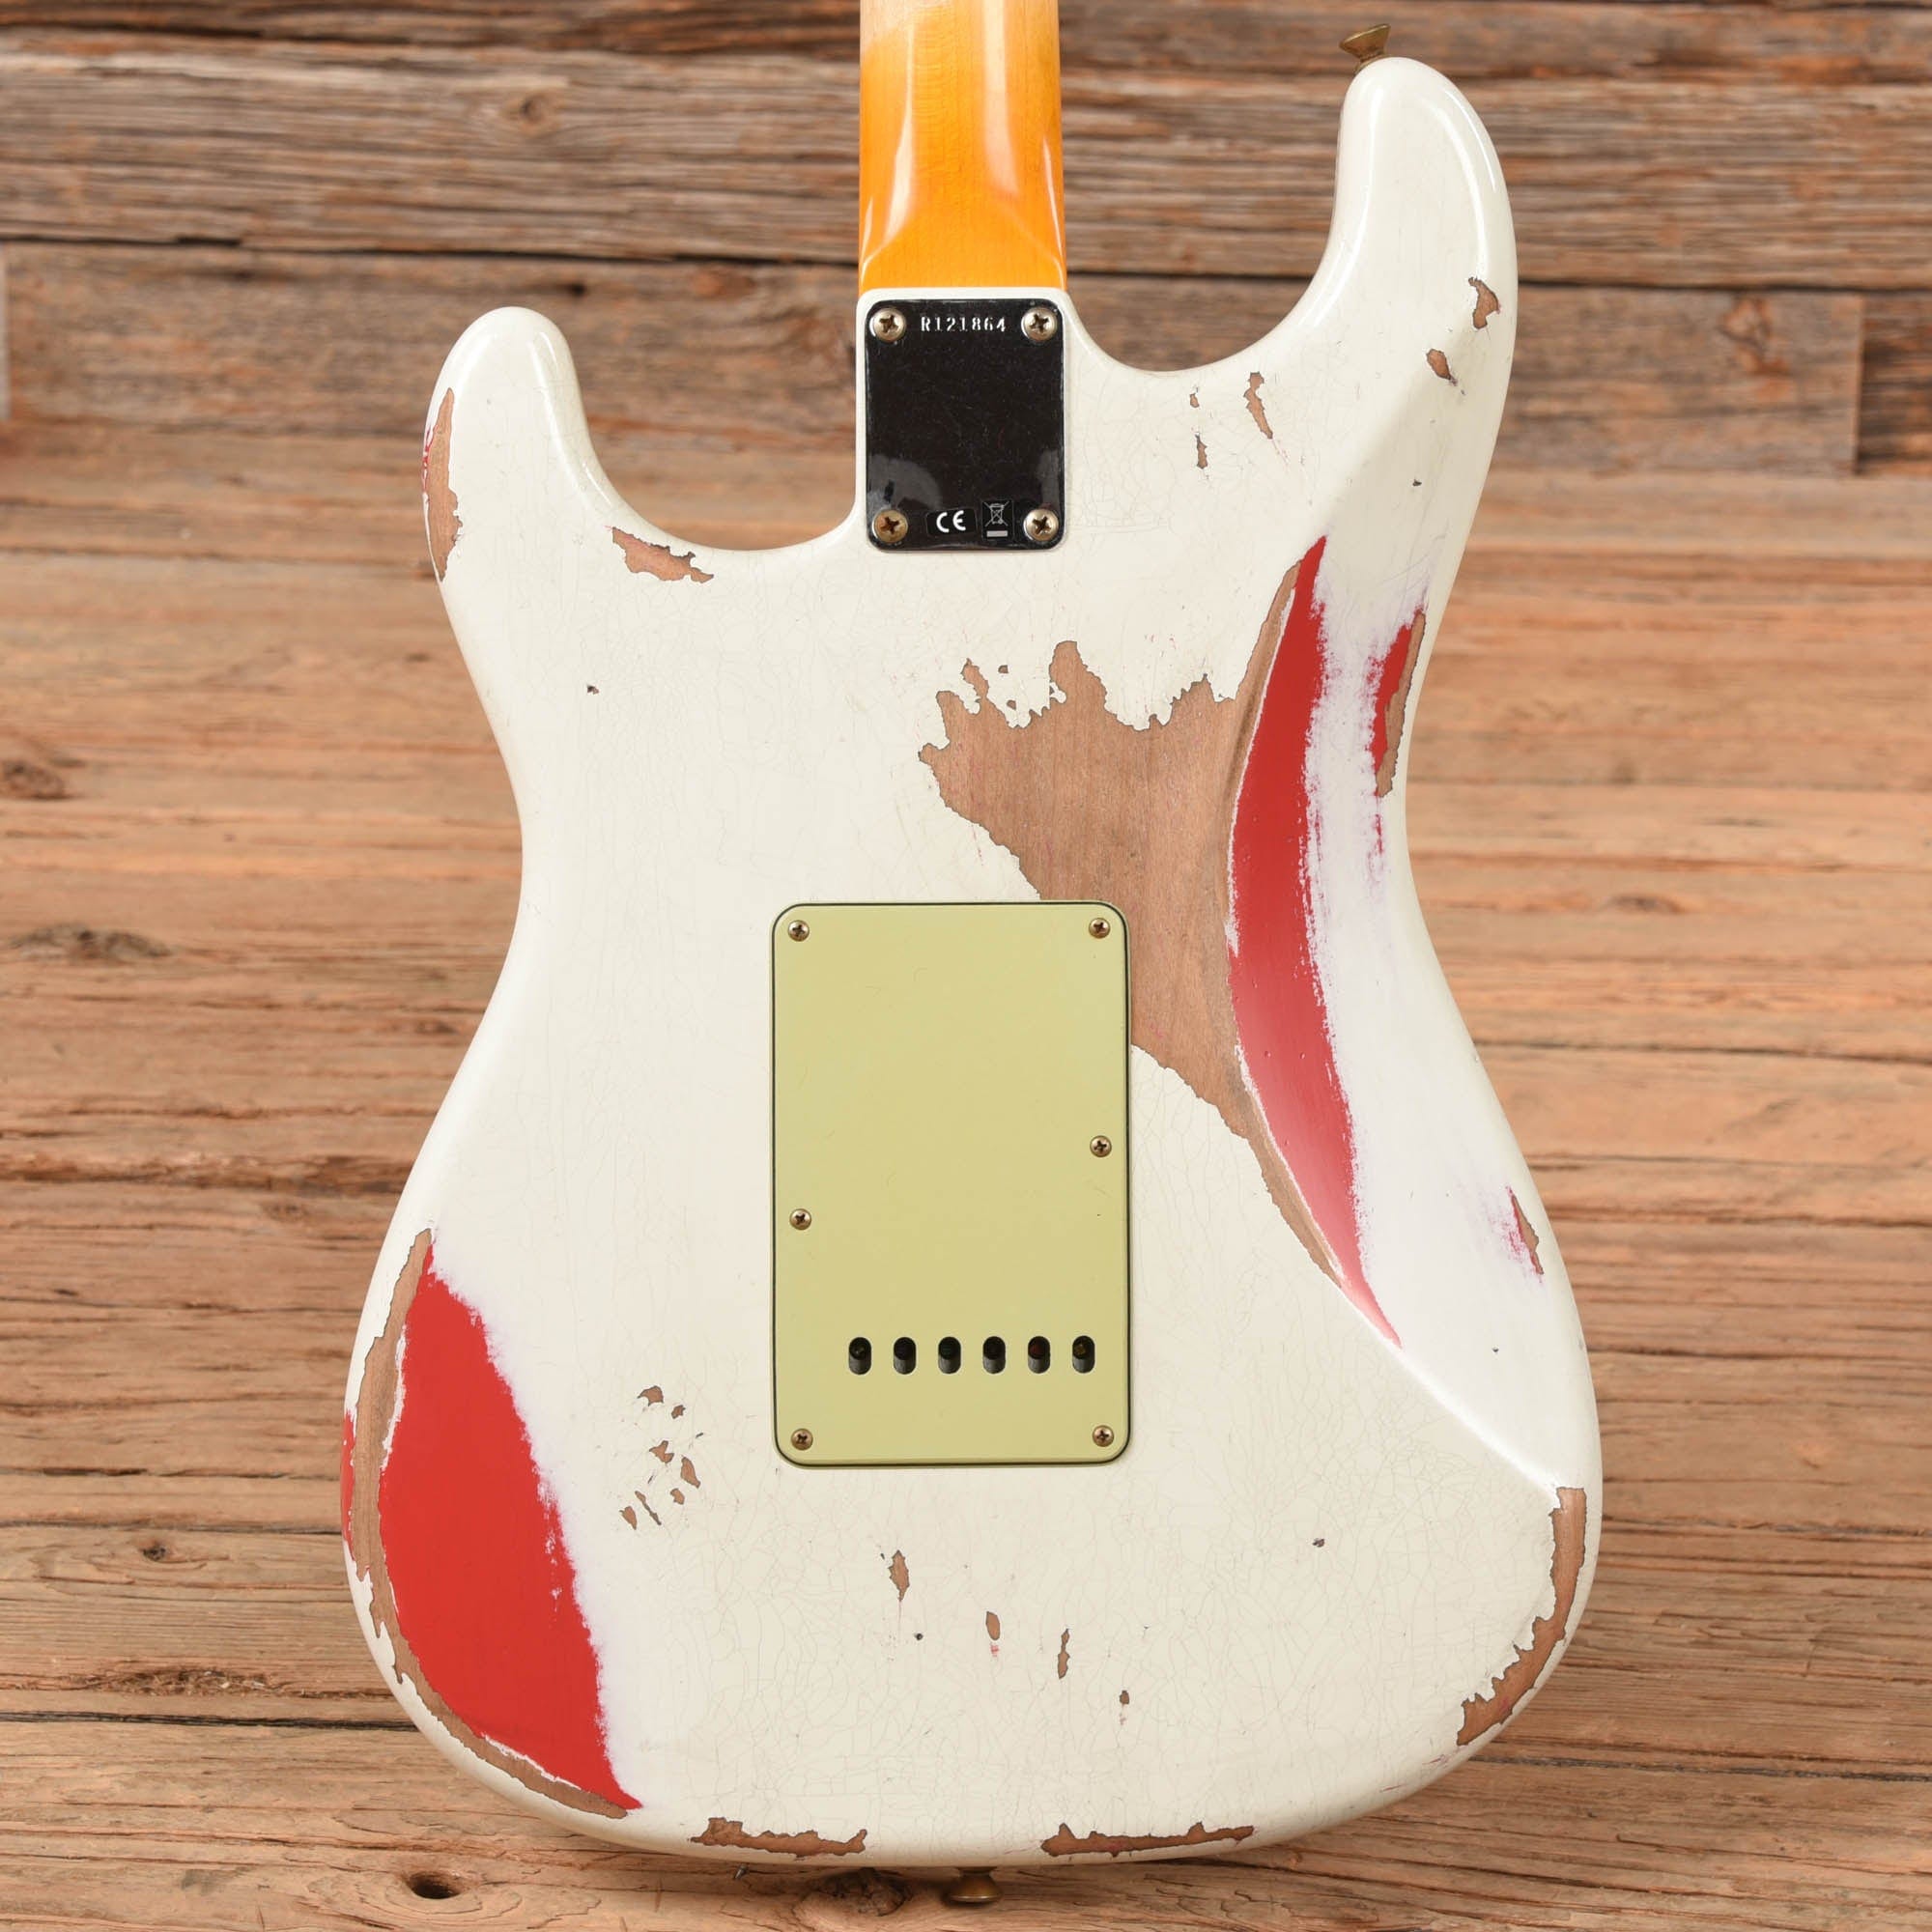 Fender Custom Shop White Lightning Stratocaster Relic Olympic White Over Fiesta Red 2022 Electric Guitars / Solid Body